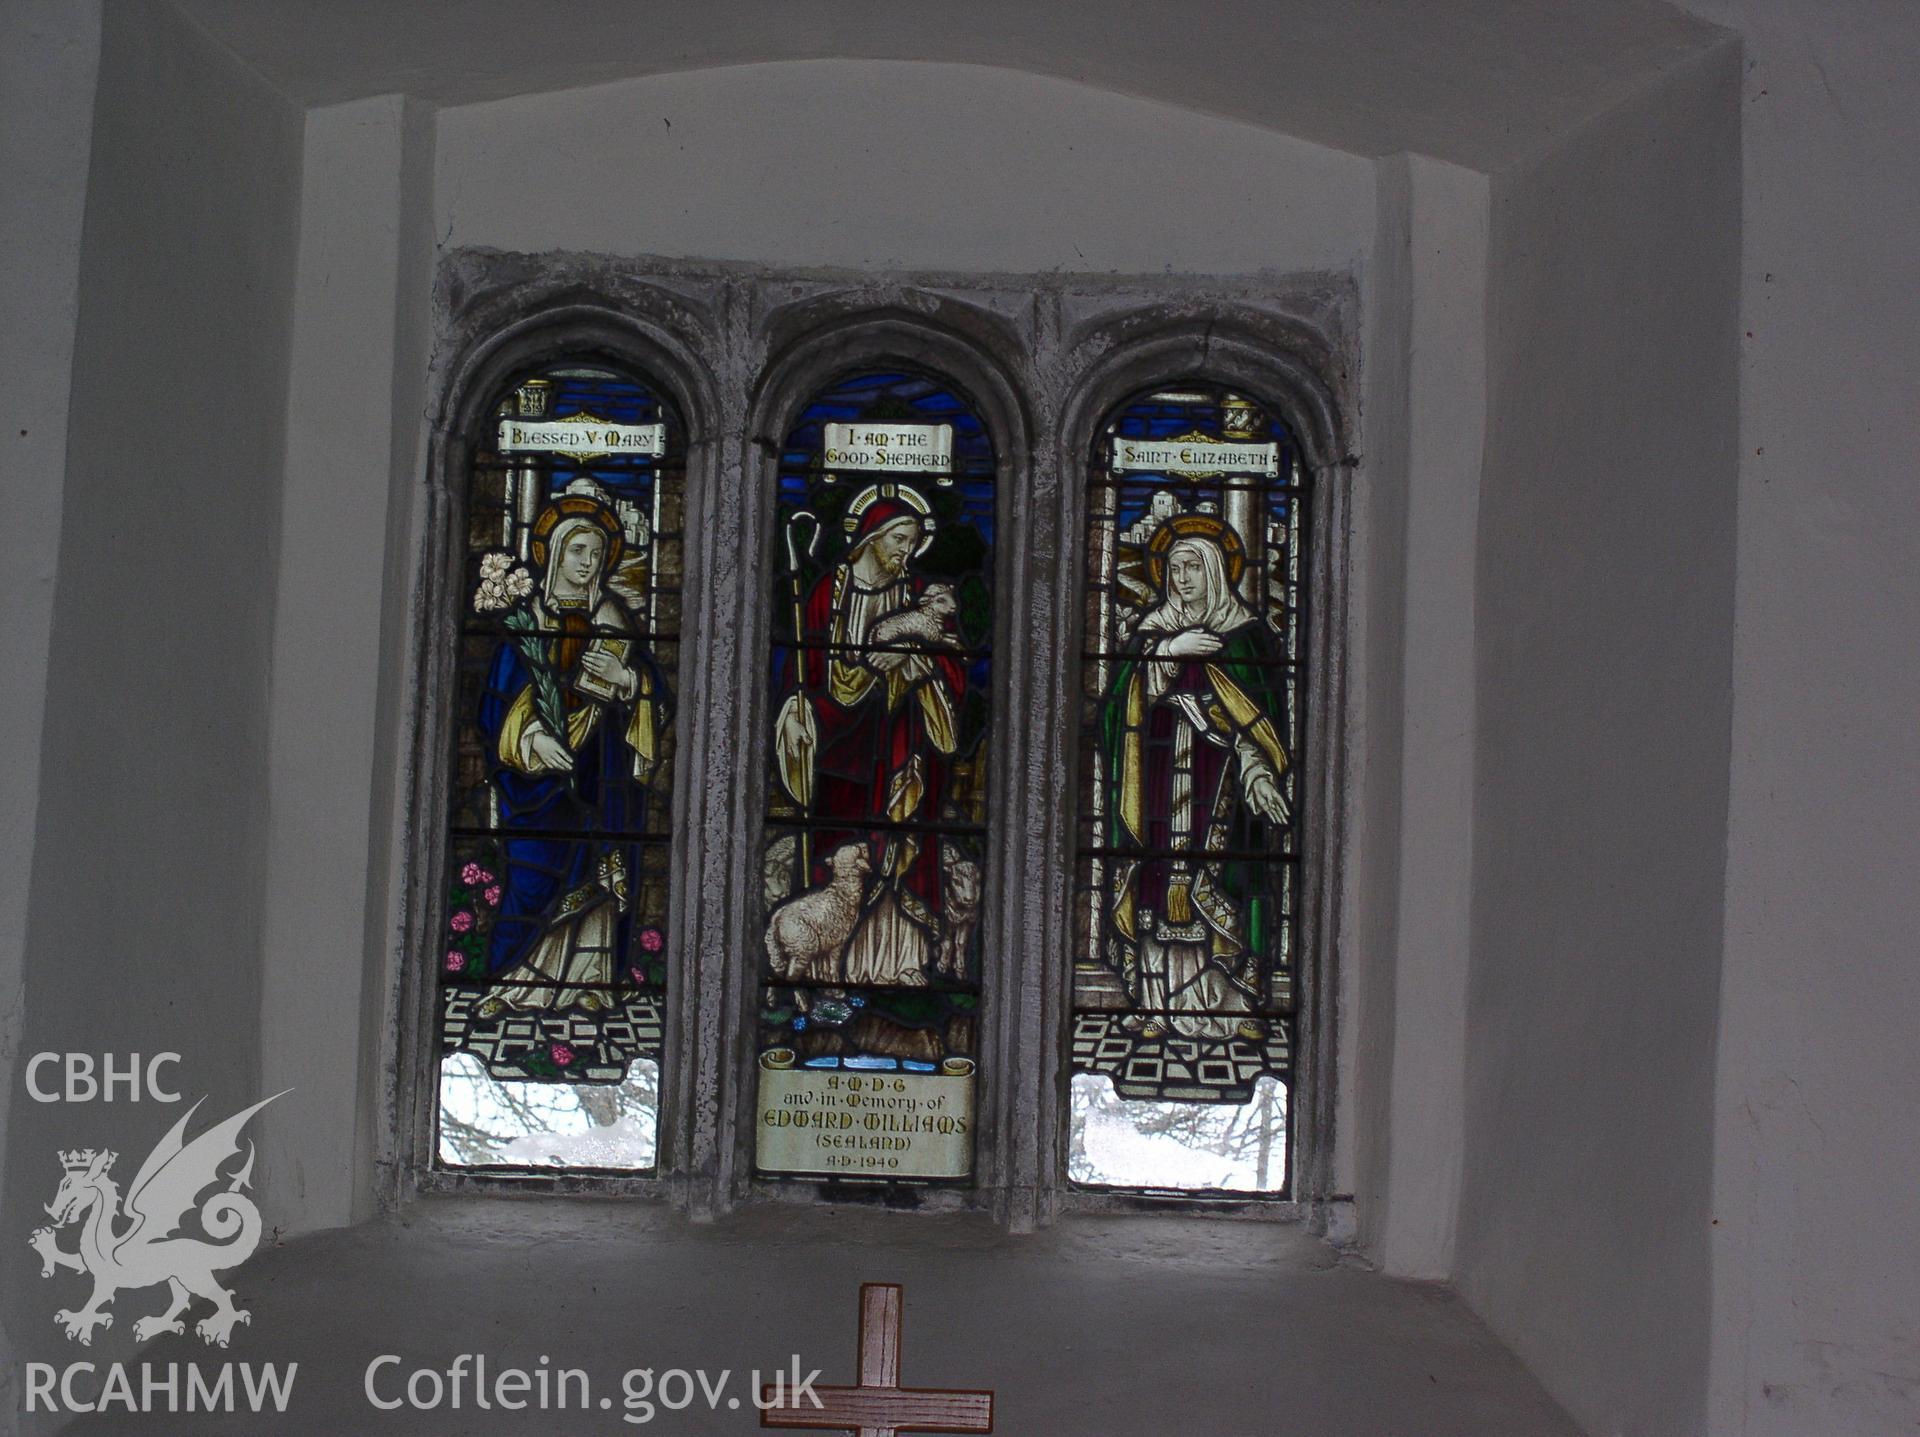 Colour digital photograph showing an interior view of a stained glass window at St James' Church, Wick; Glamorgan.